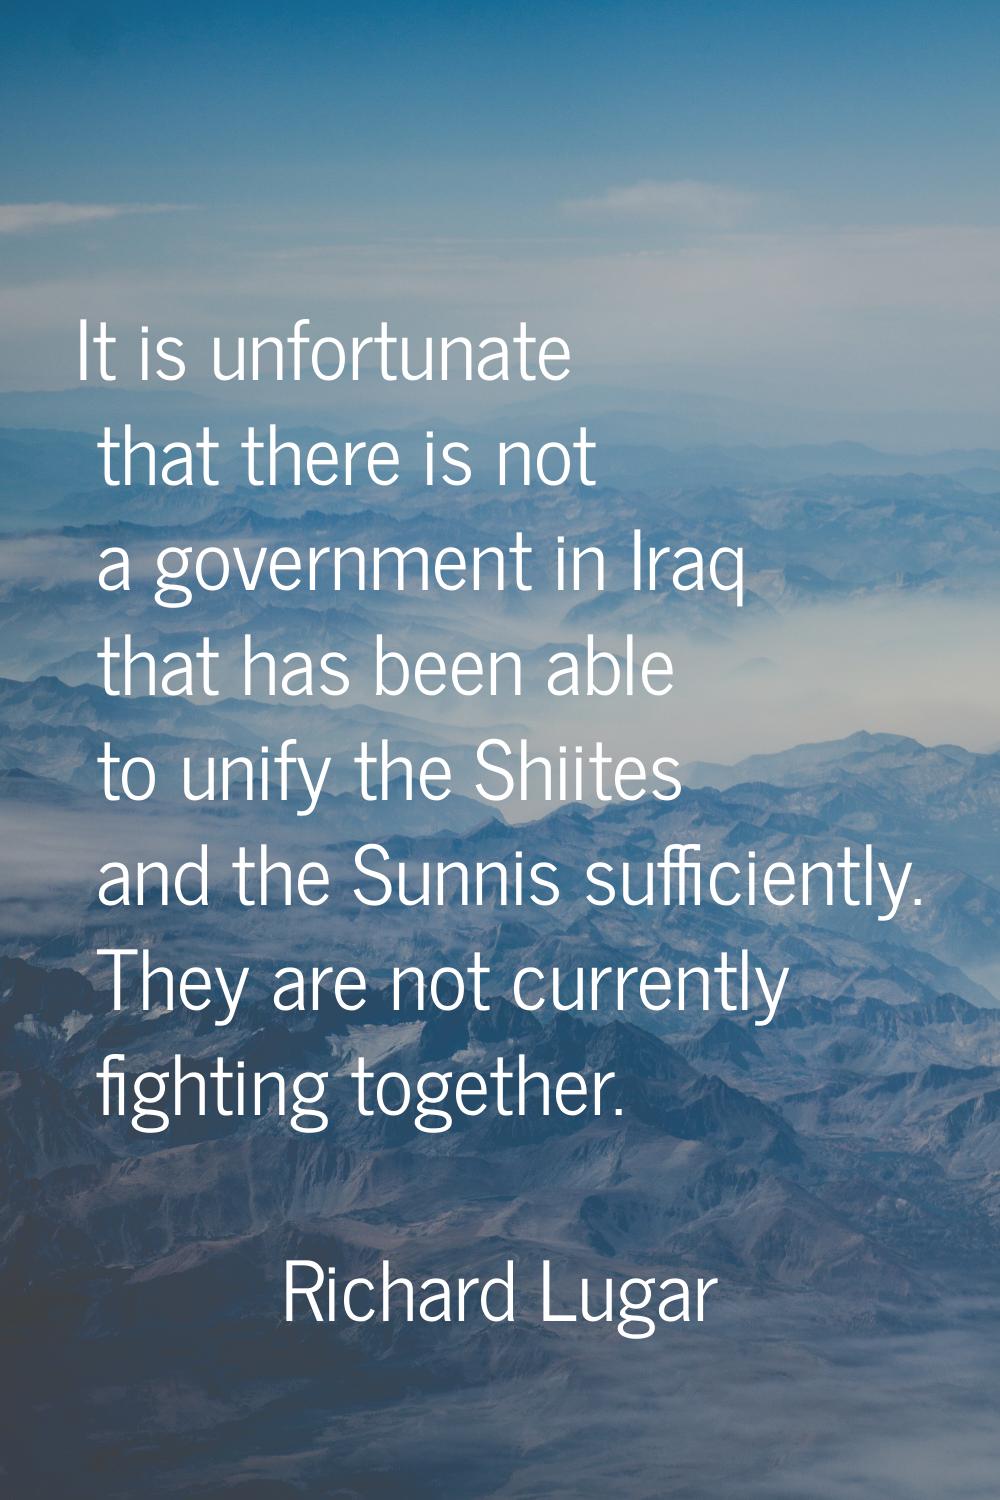 It is unfortunate that there is not a government in Iraq that has been able to unify the Shiites an